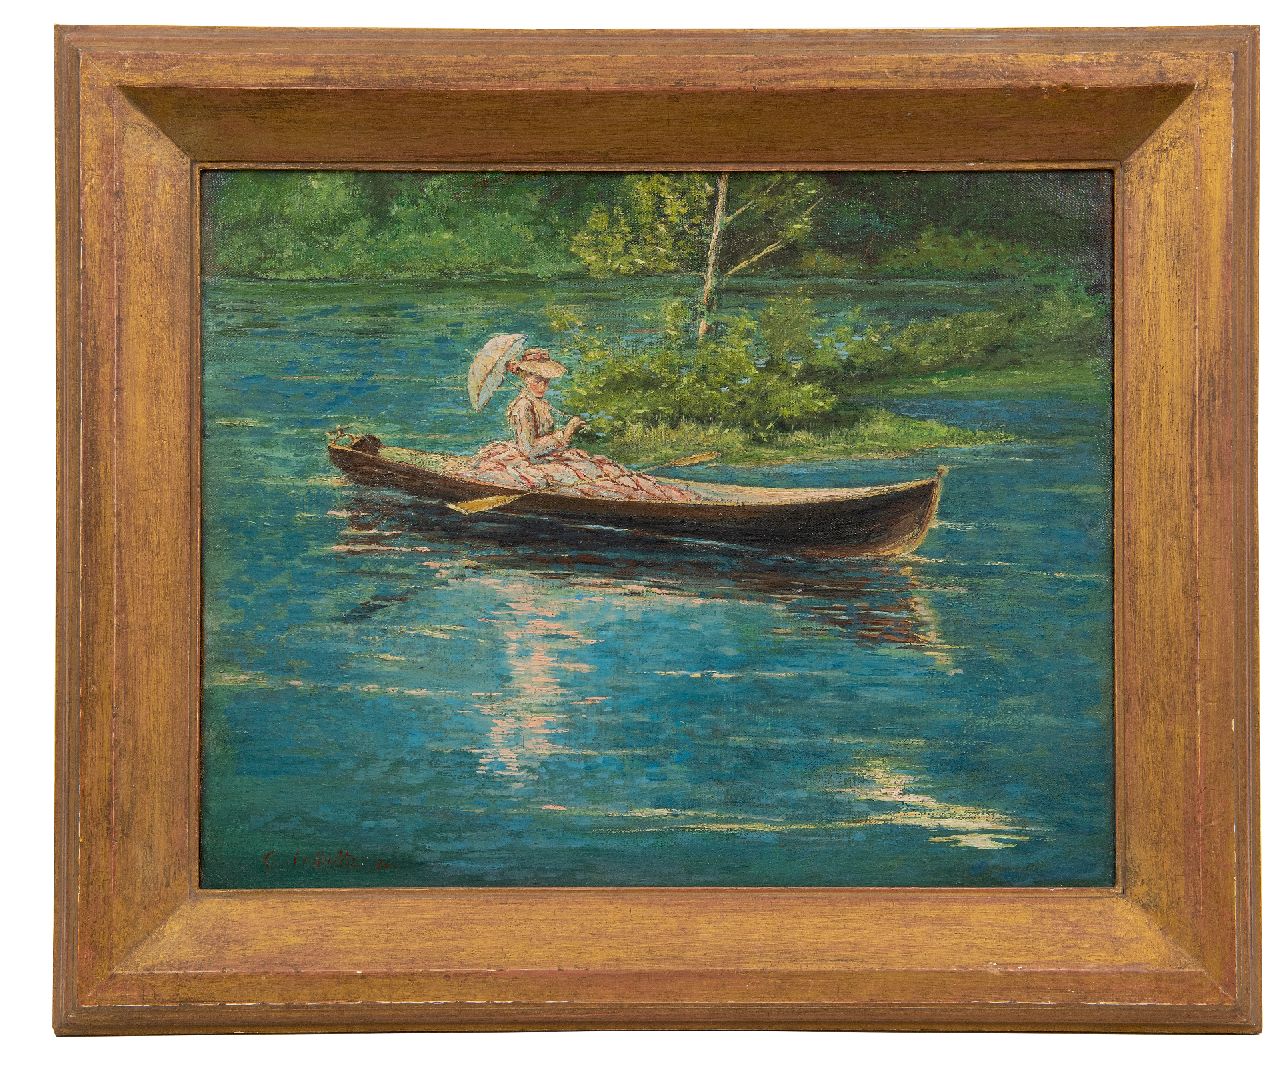 Schultz G.F.  | George F. Schultz | Paintings offered for sale | Rowing on the lake, oil on canvas 38.0 x 46.0 cm, signed l.l. and dated '30